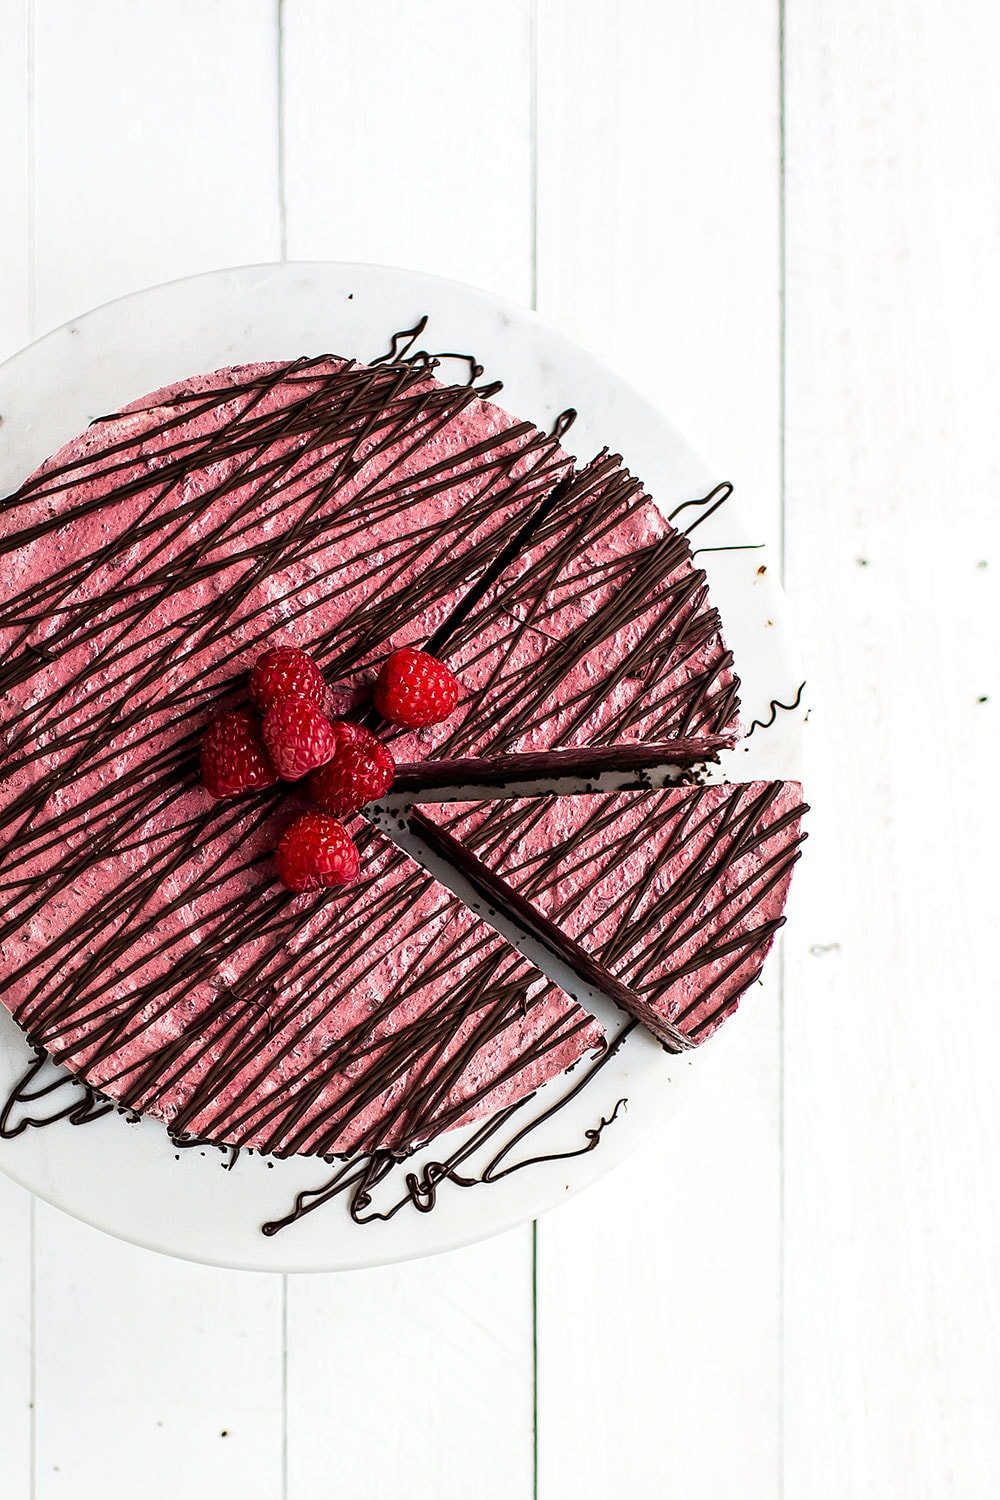 No Bake Frozen Chocolate Raspberry Pie features a chocolate graham cracker crust, creamy chocolate raspberry filling, and is topped with more chocolate! Perfect refreshing summer treat.